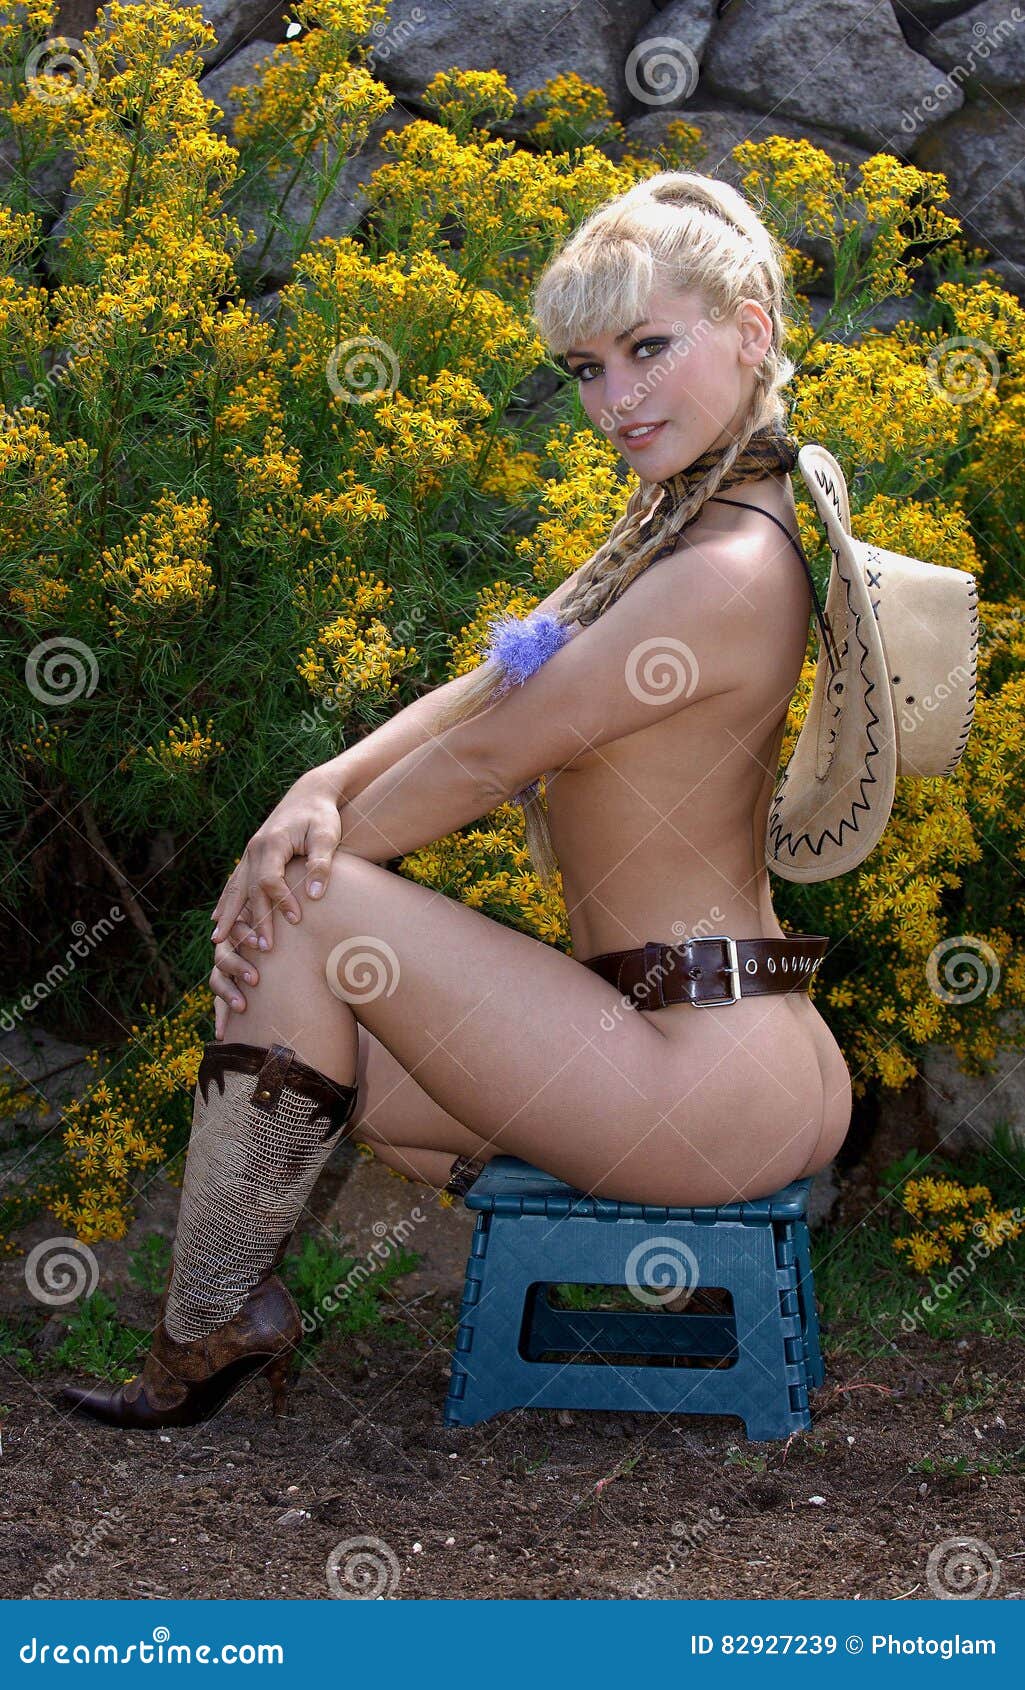 Naked Cowgirl Pics